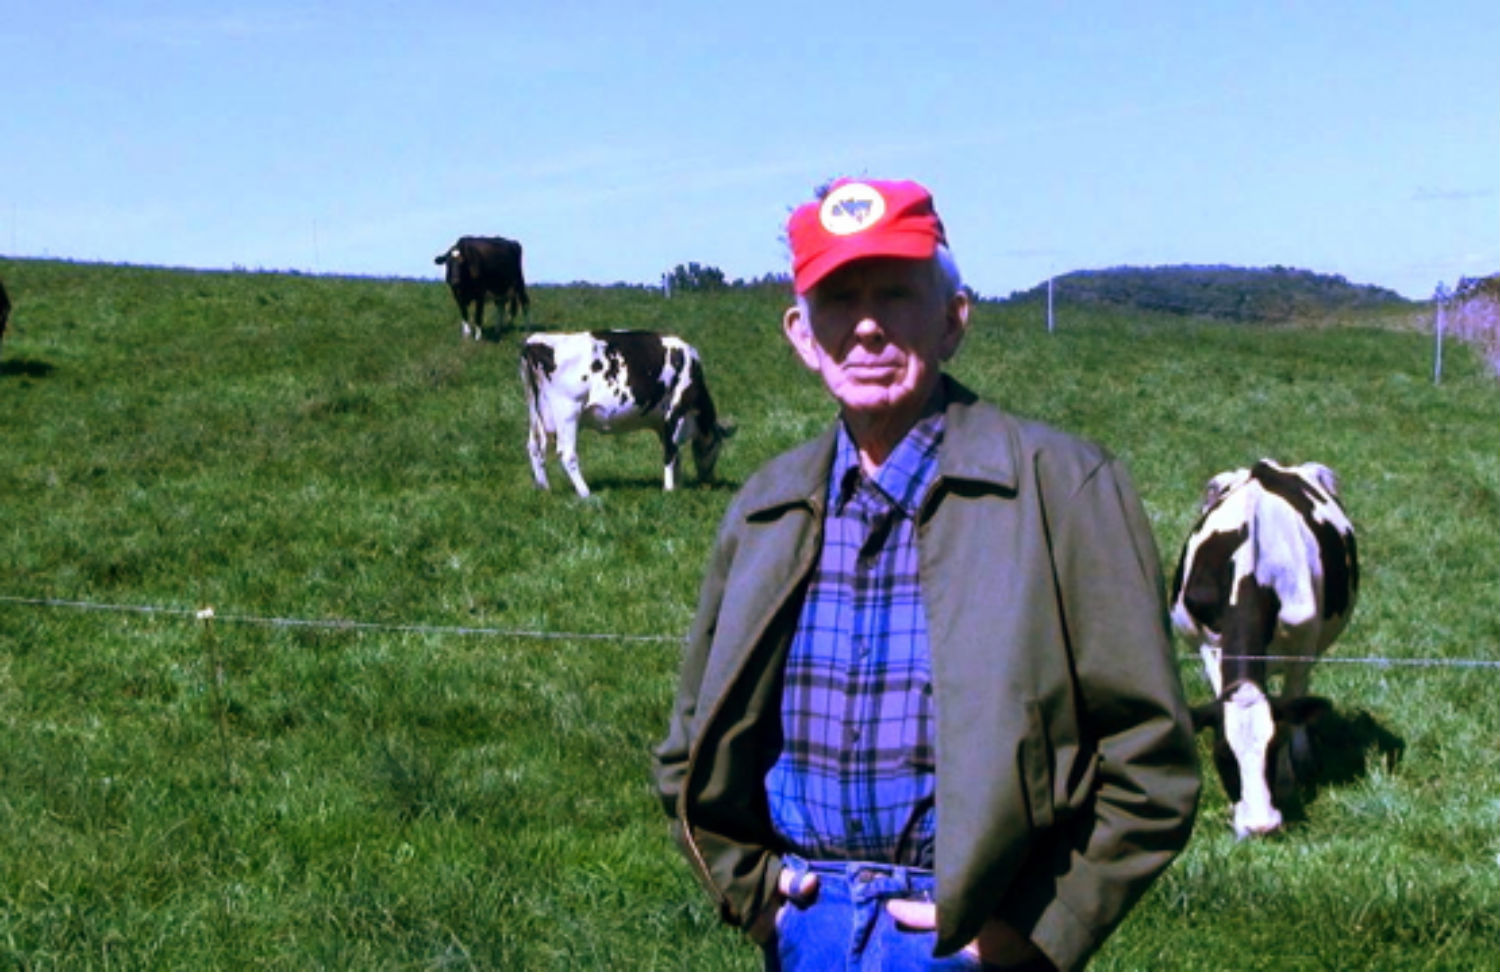 The Farmer Who Took on Corporate Globalization